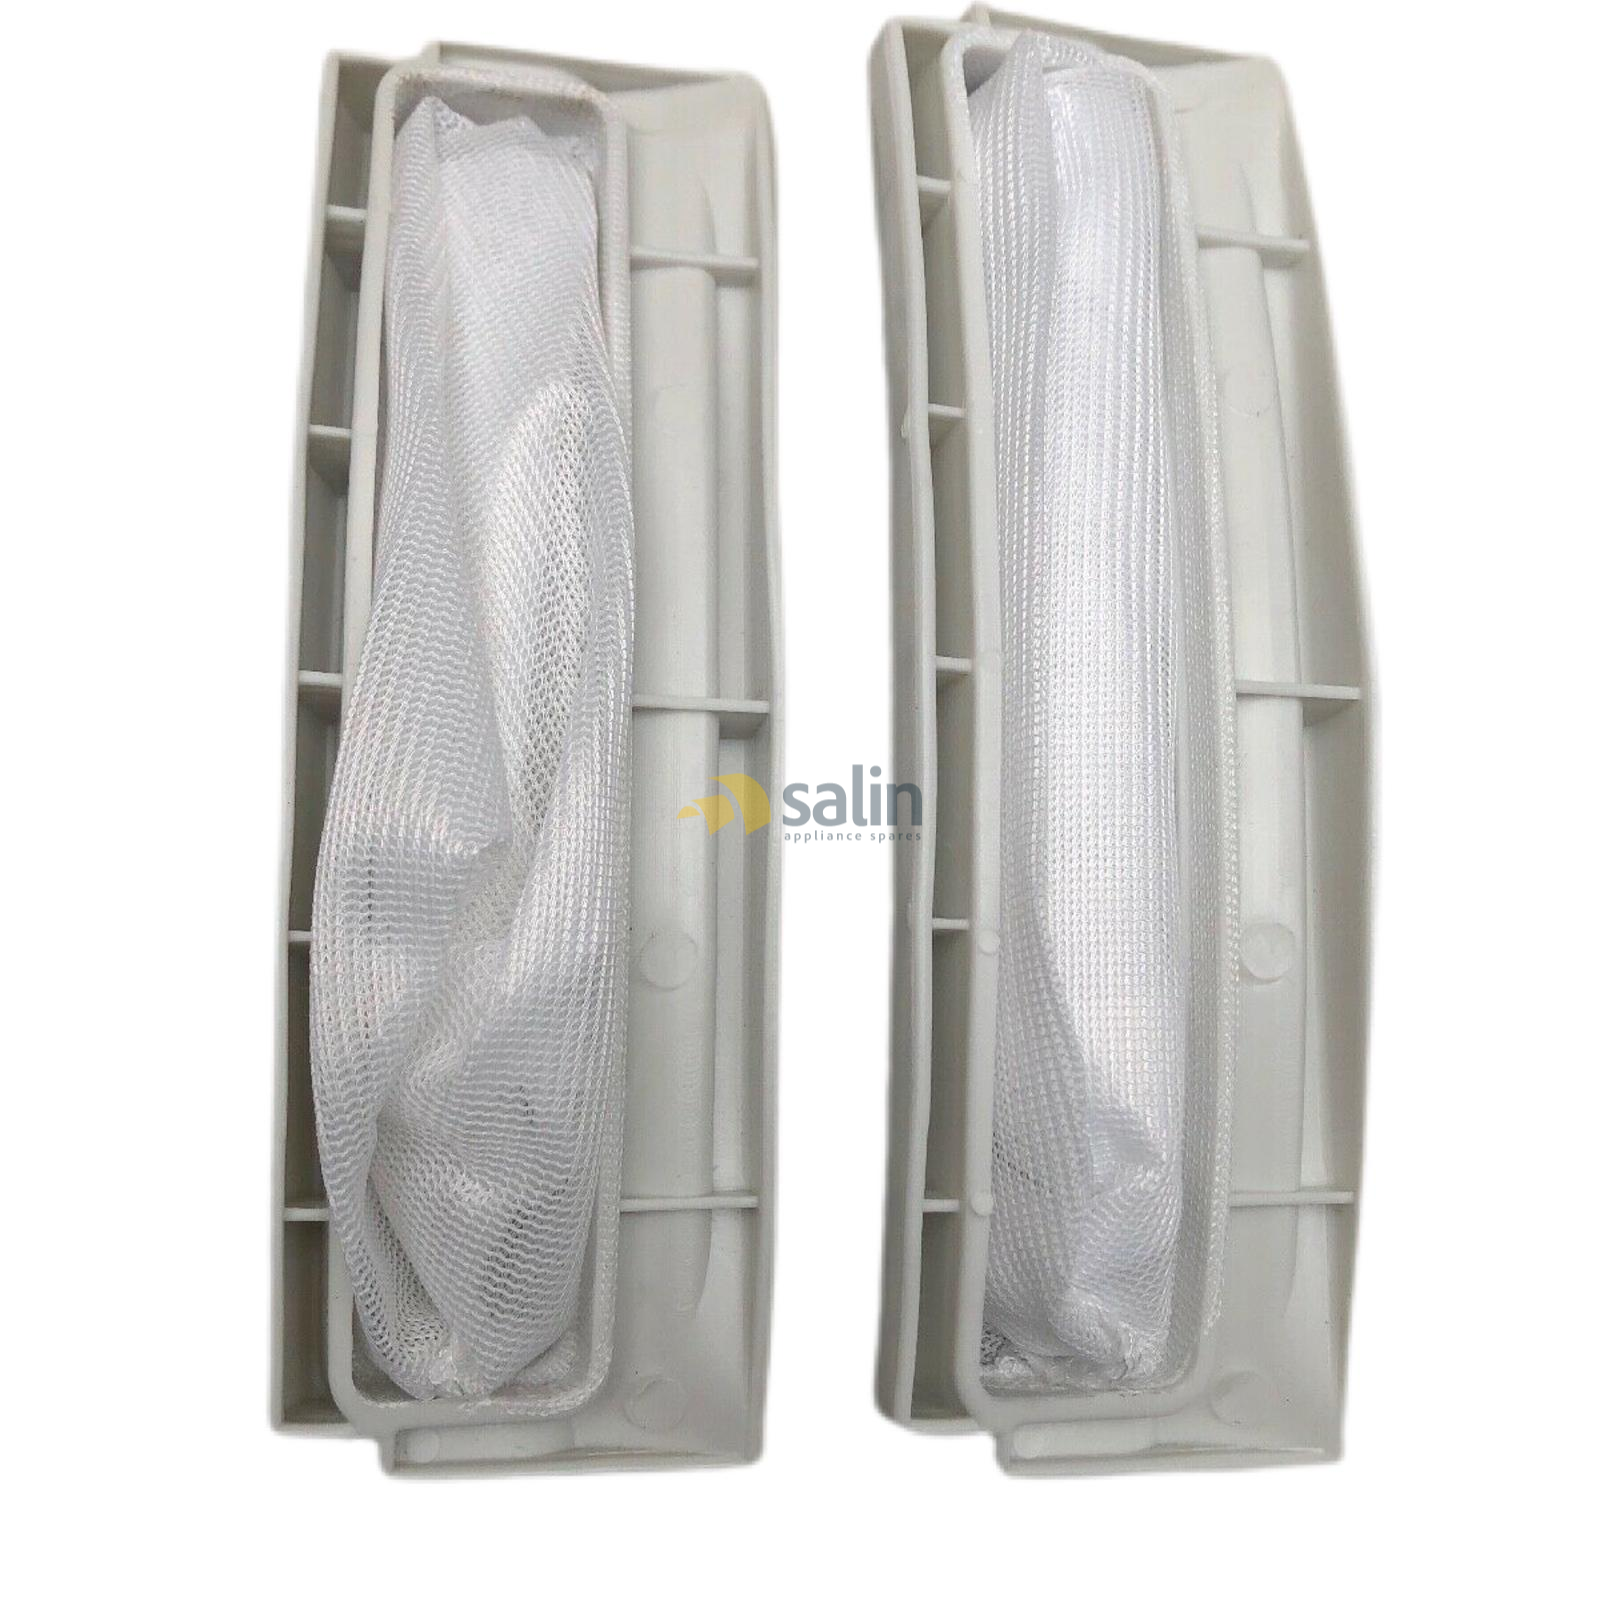 2 x NEC Washing Machine Lint Filter Bag NW803 NW804 NW892 NW893 NW893A 